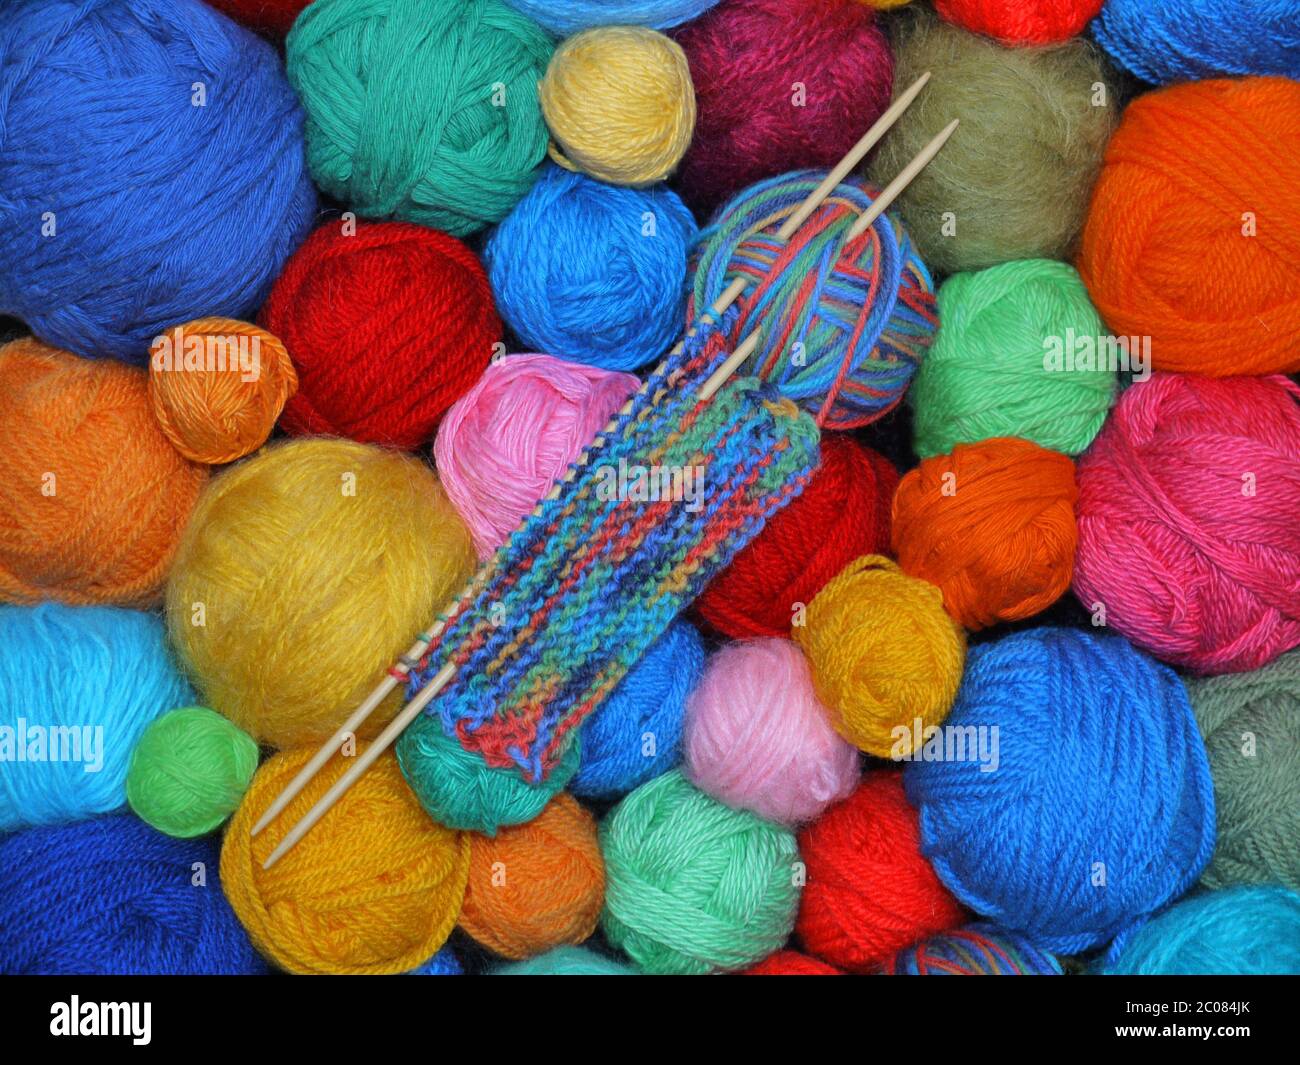 colorful balls of wool Stock Photo